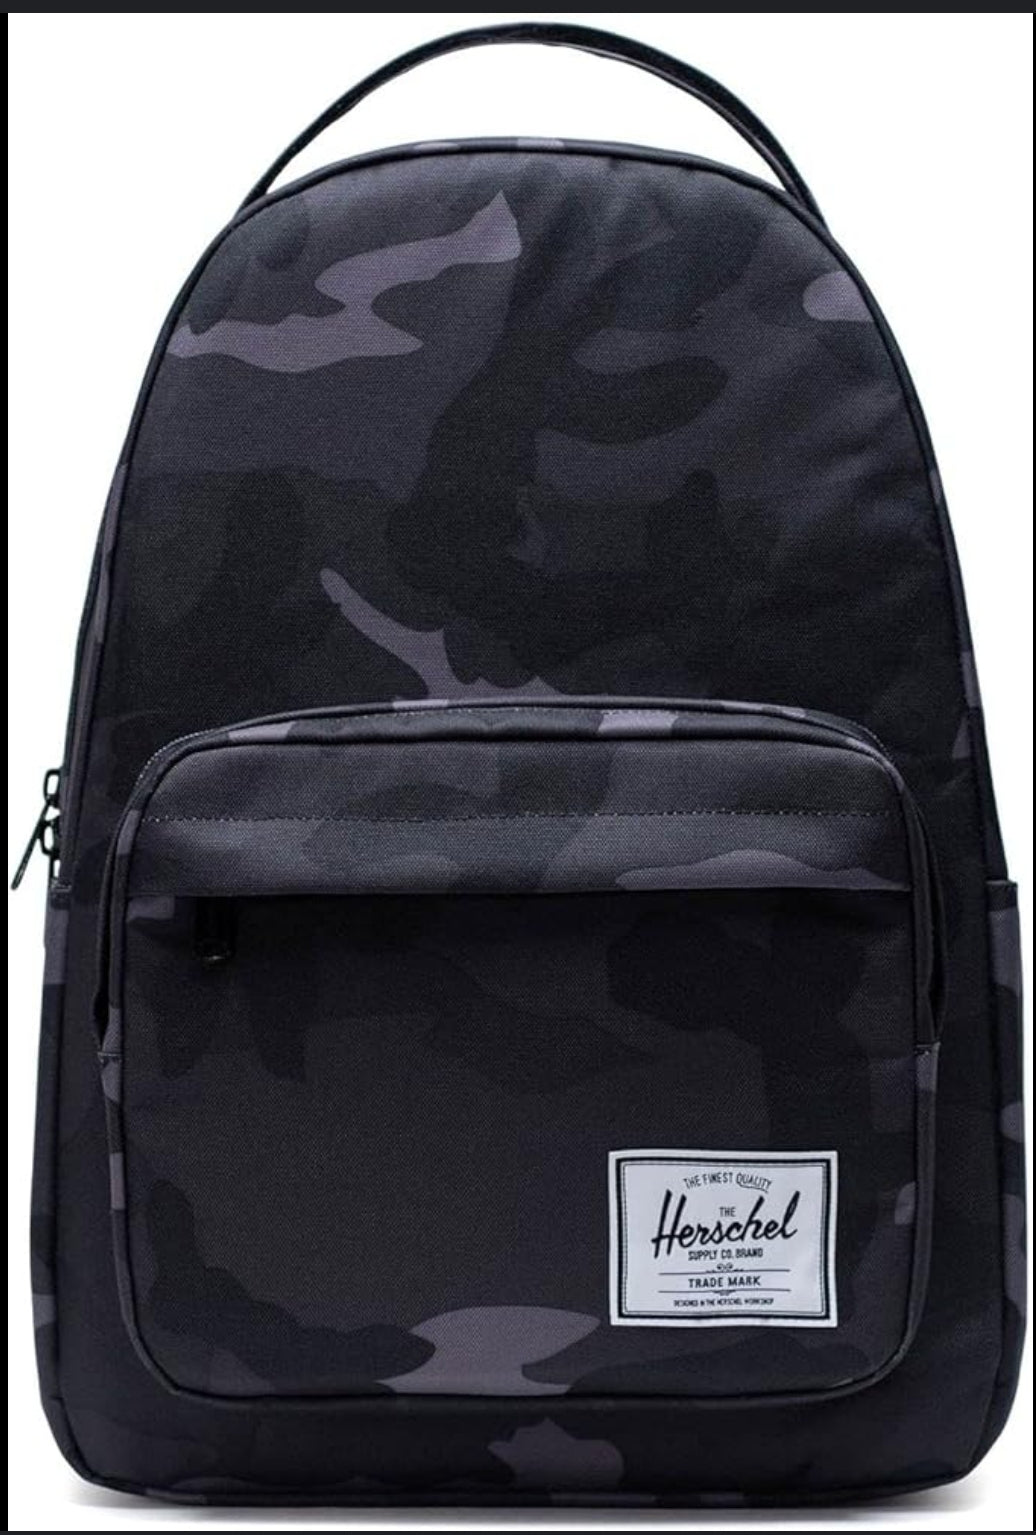 B099, classics are made, they are not born. 
The USA style backpack.